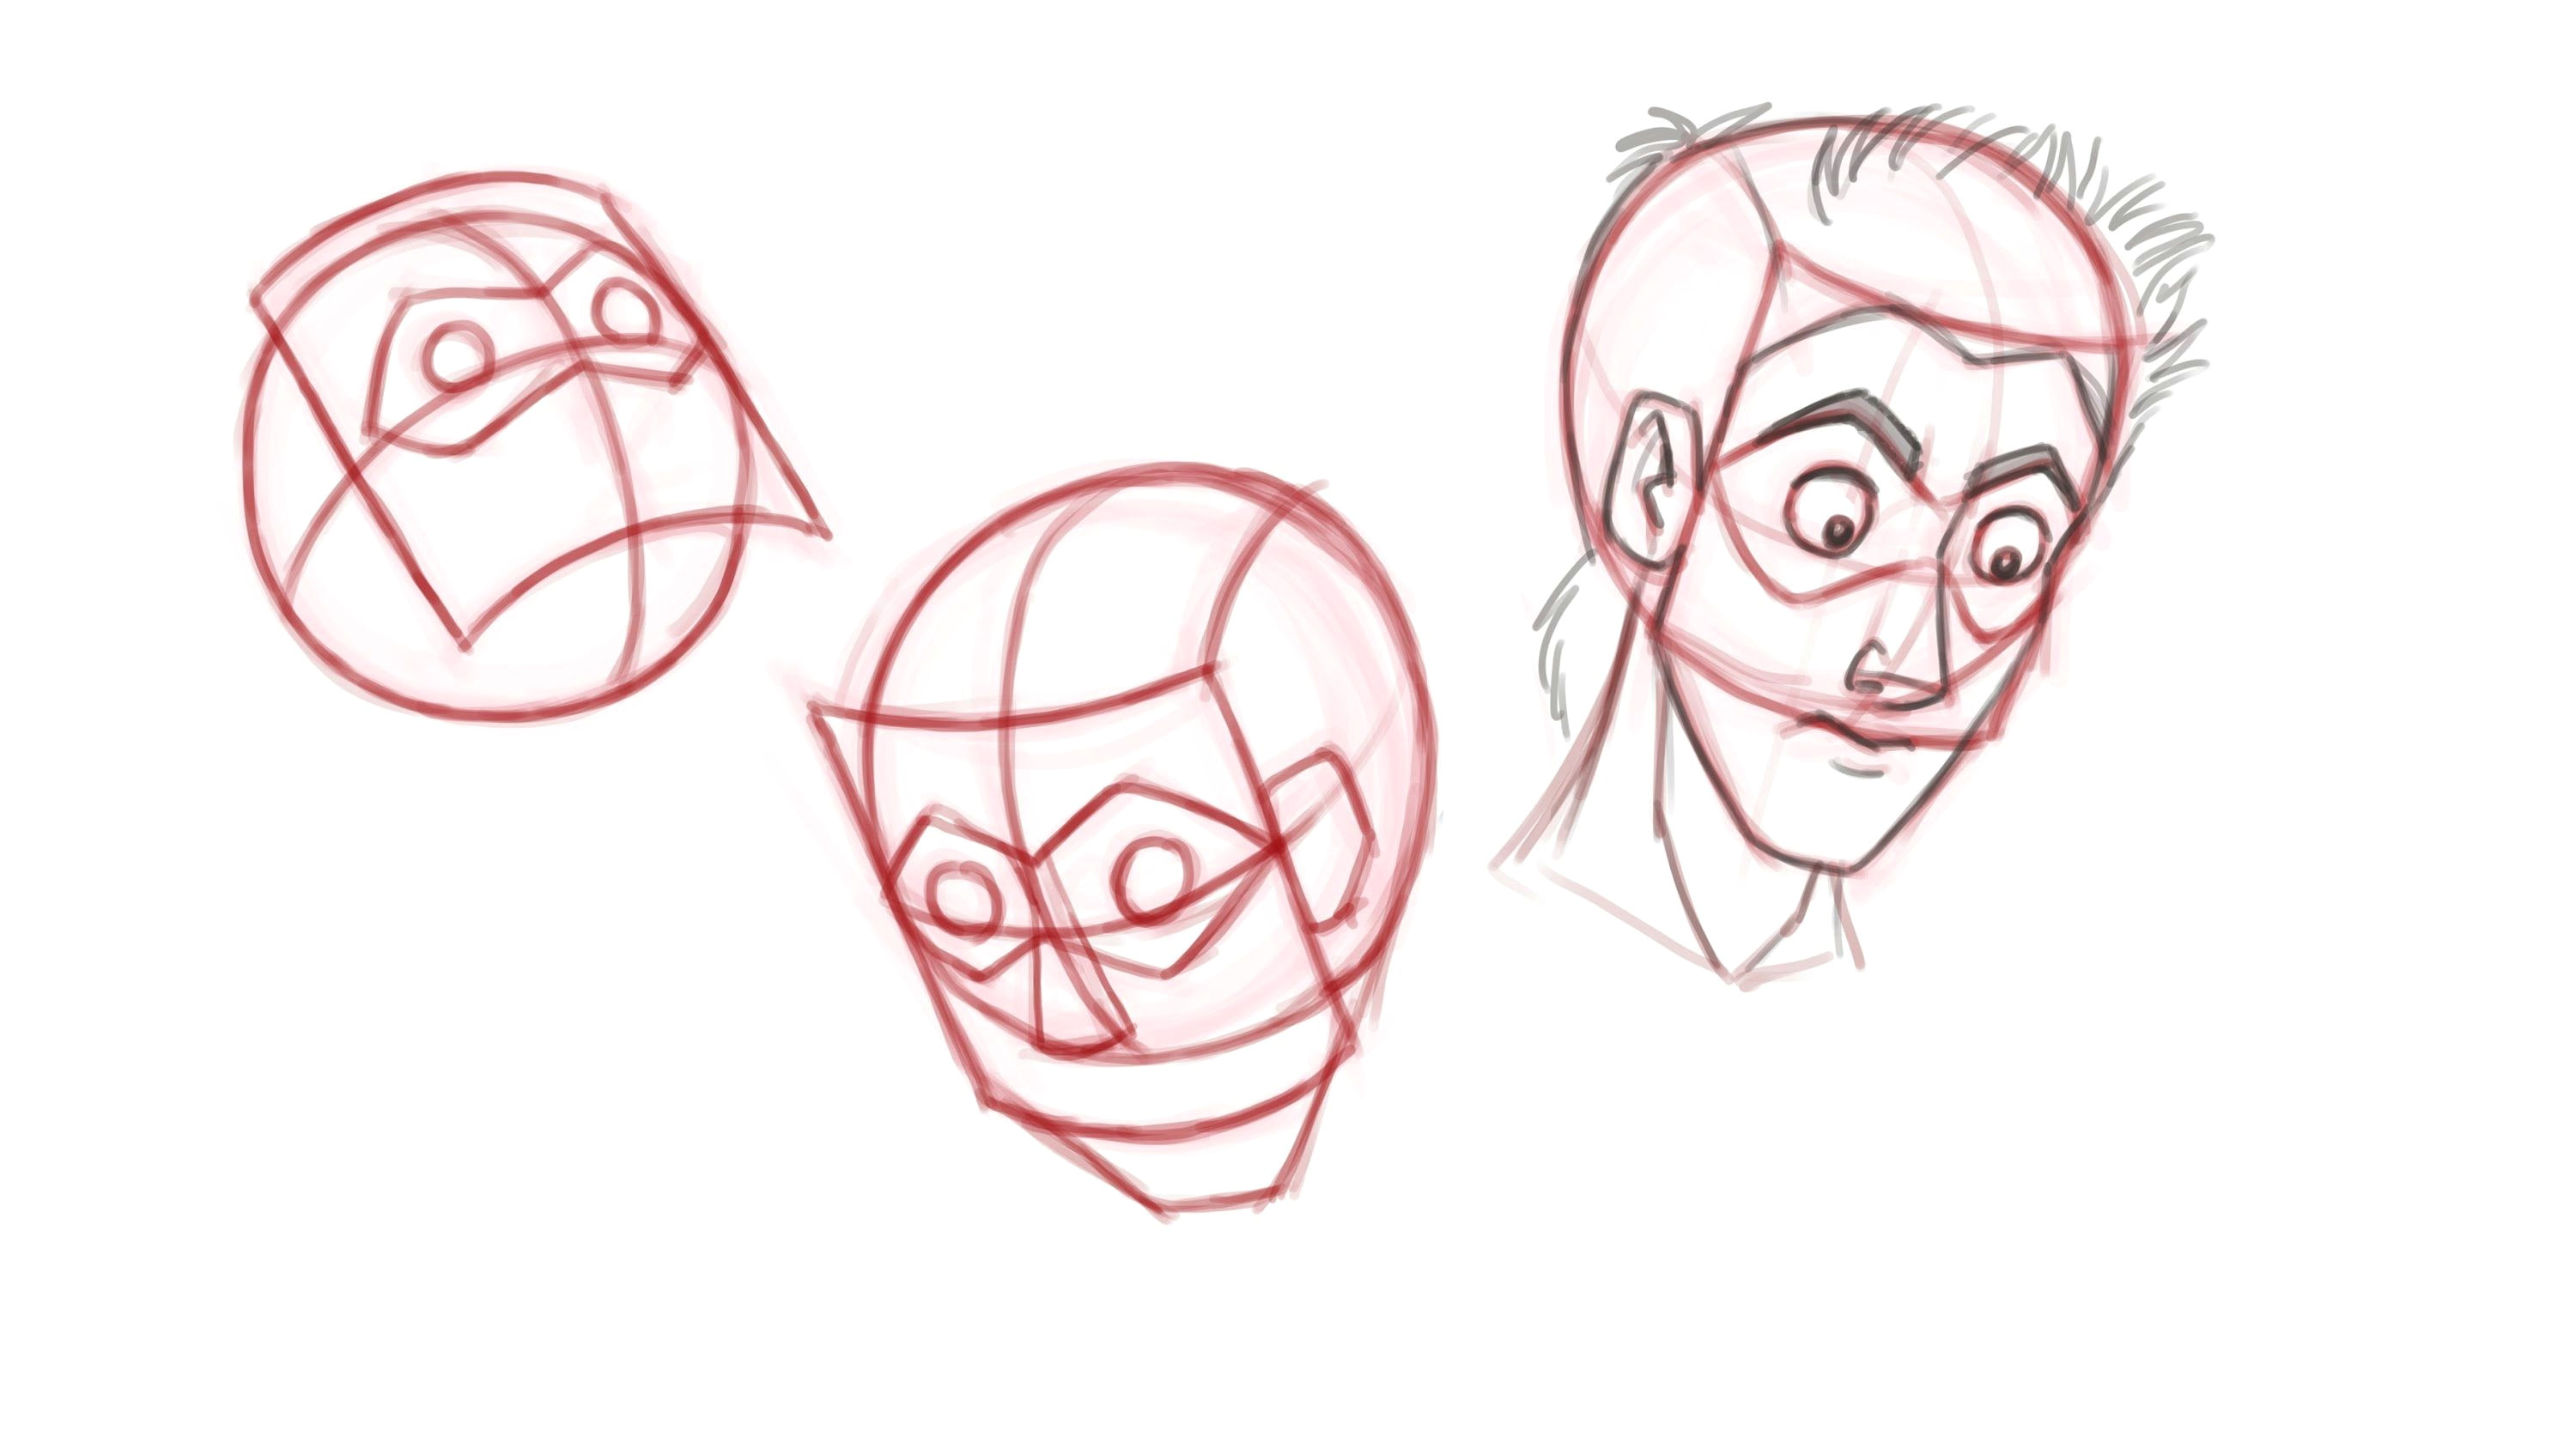 drawn animation tutorial how to animate heads drawing faces from e